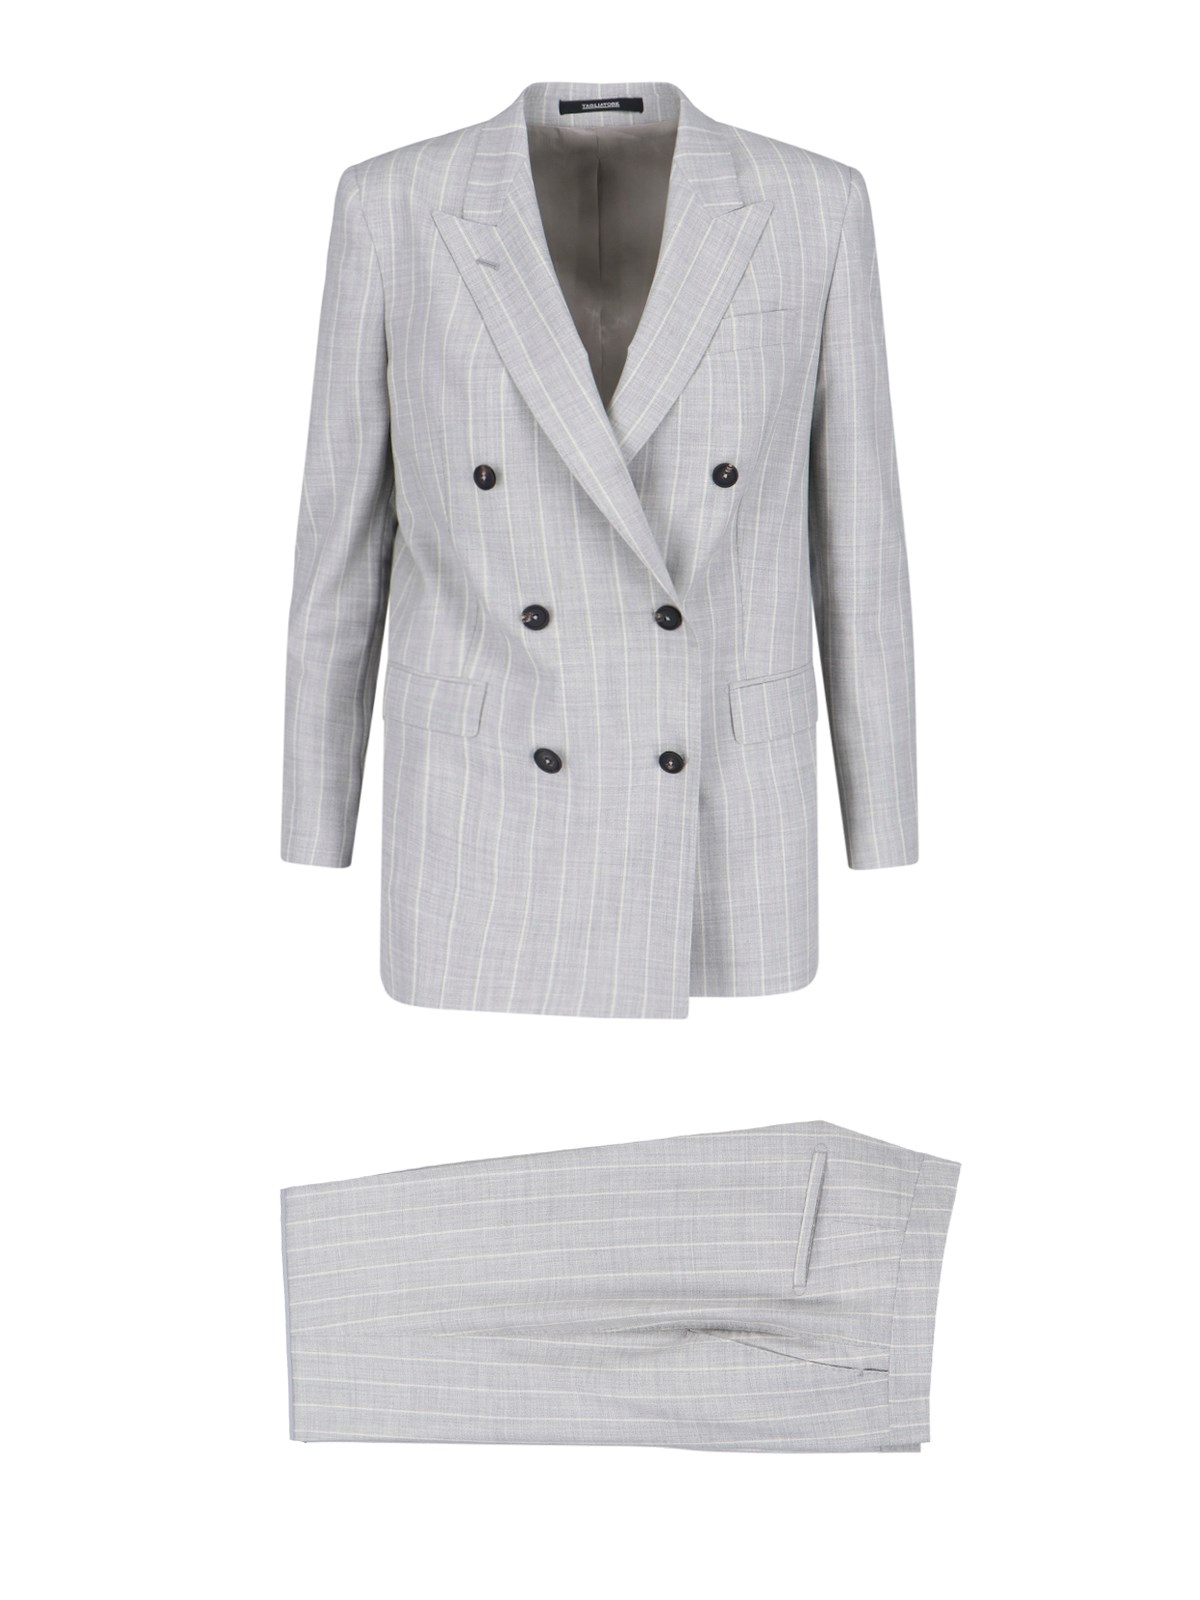 Tagliatore Double-breasted Suit In Gray